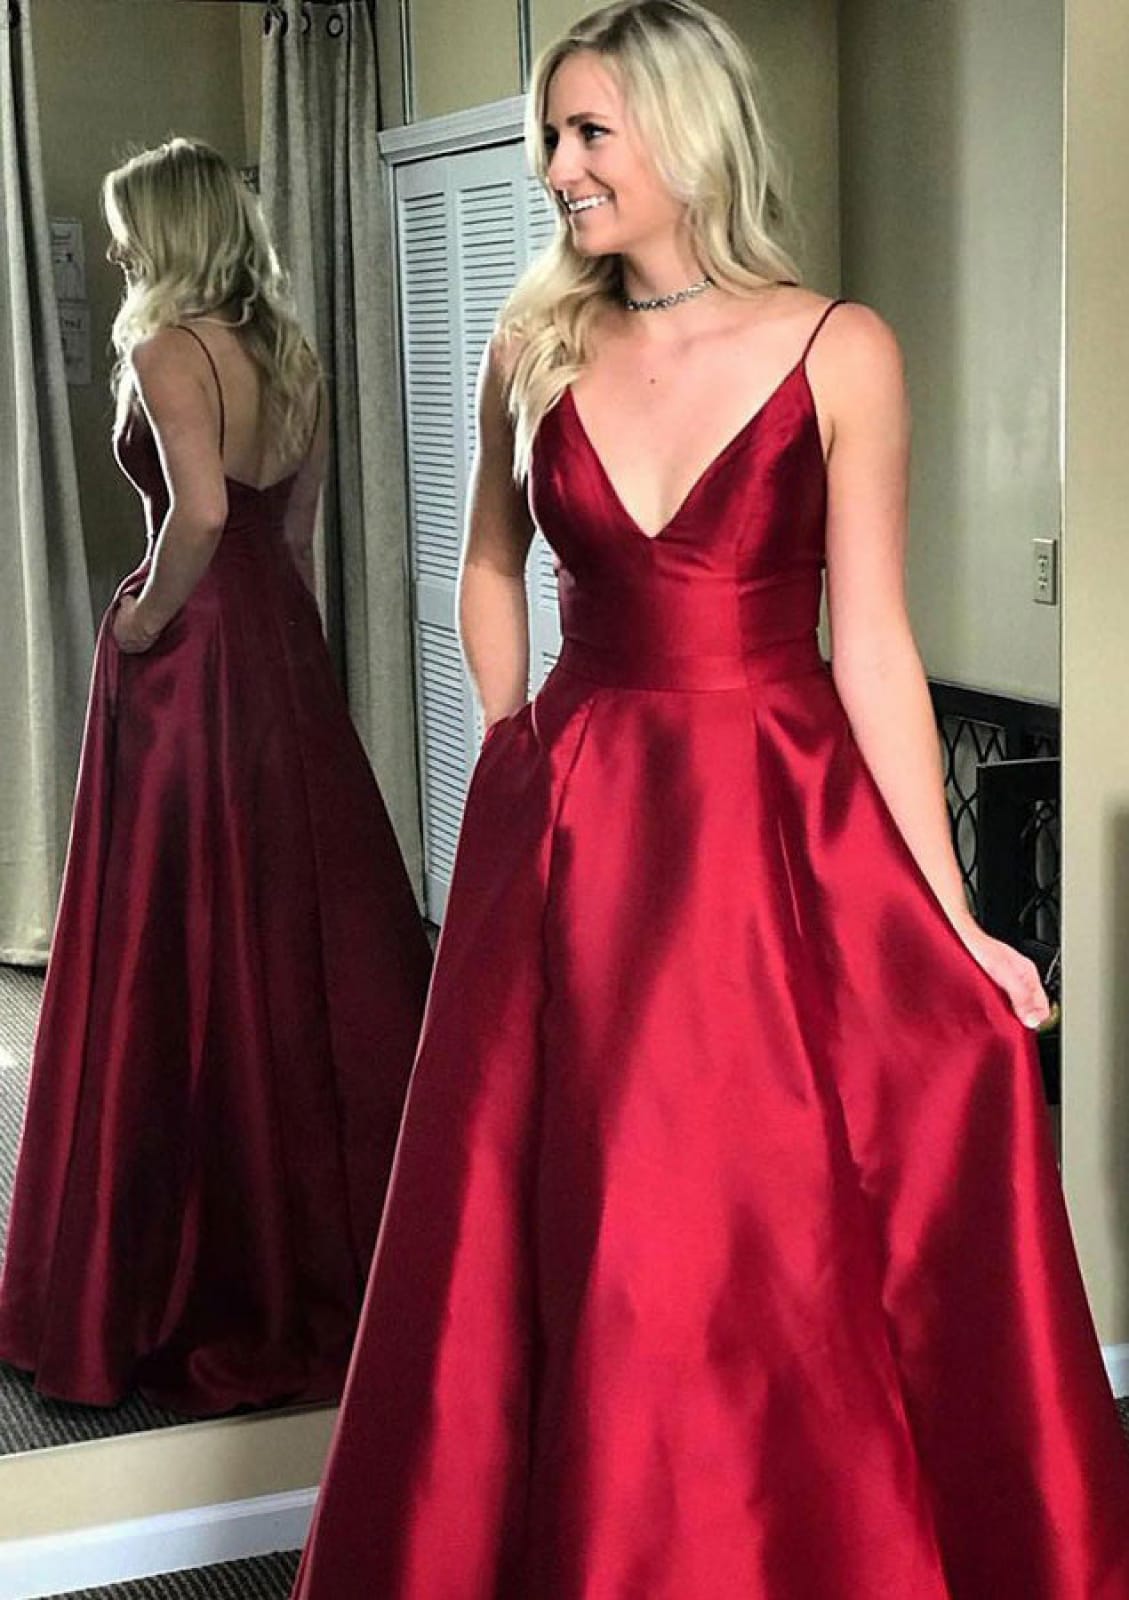 Thin Strap A-line Plunging Sleeveless Long Red Satin Evening Gown